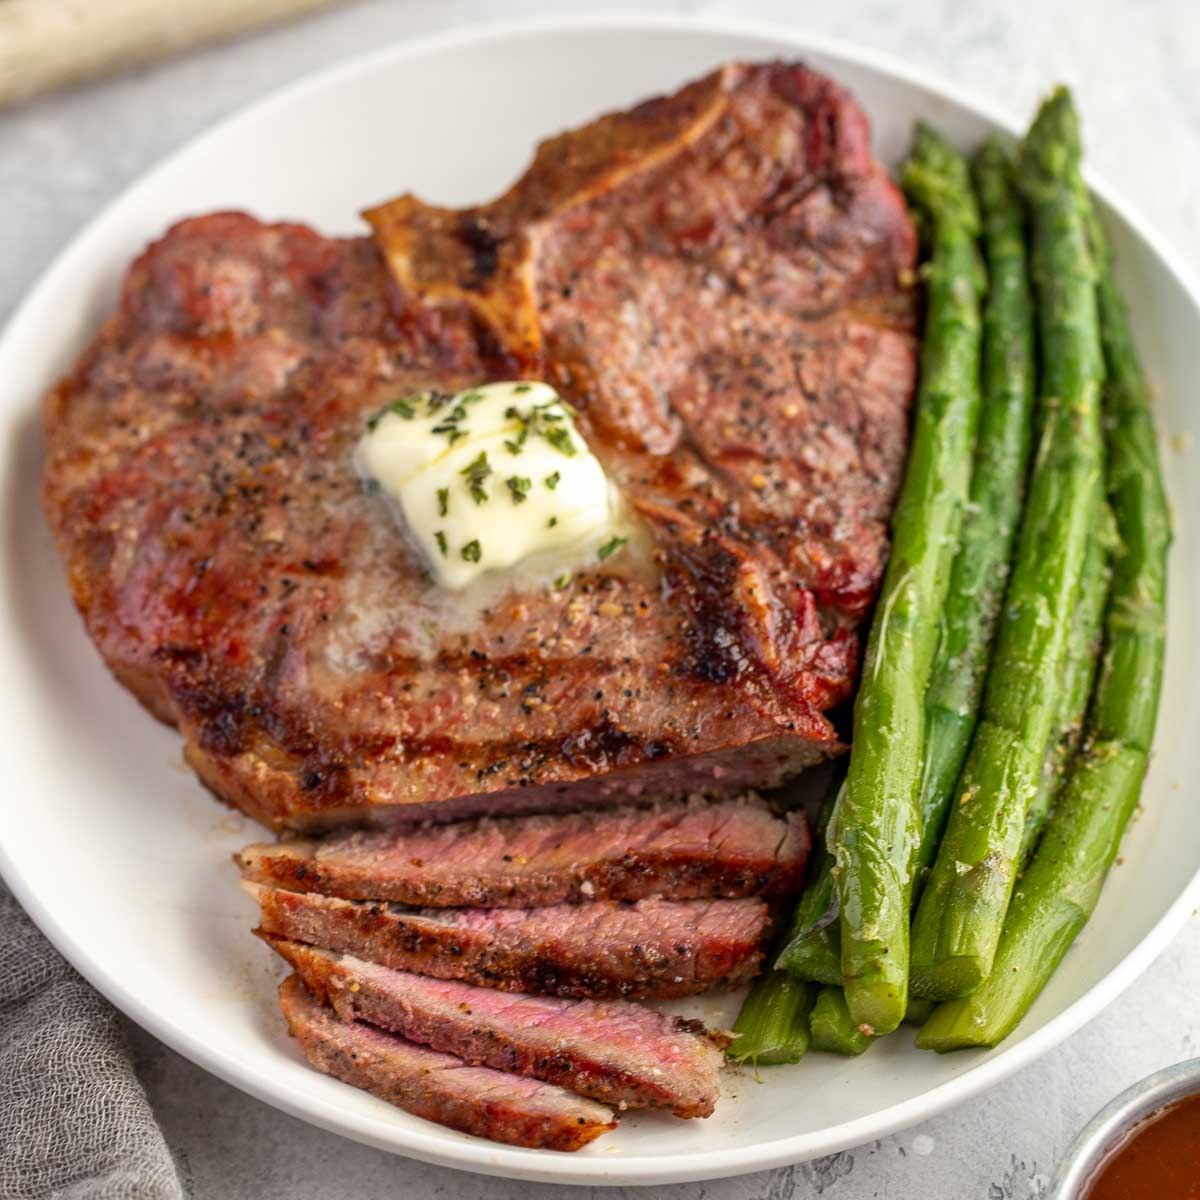 A grilled T-bone steak topped with herb butter on a white plate with a side of asparagus.